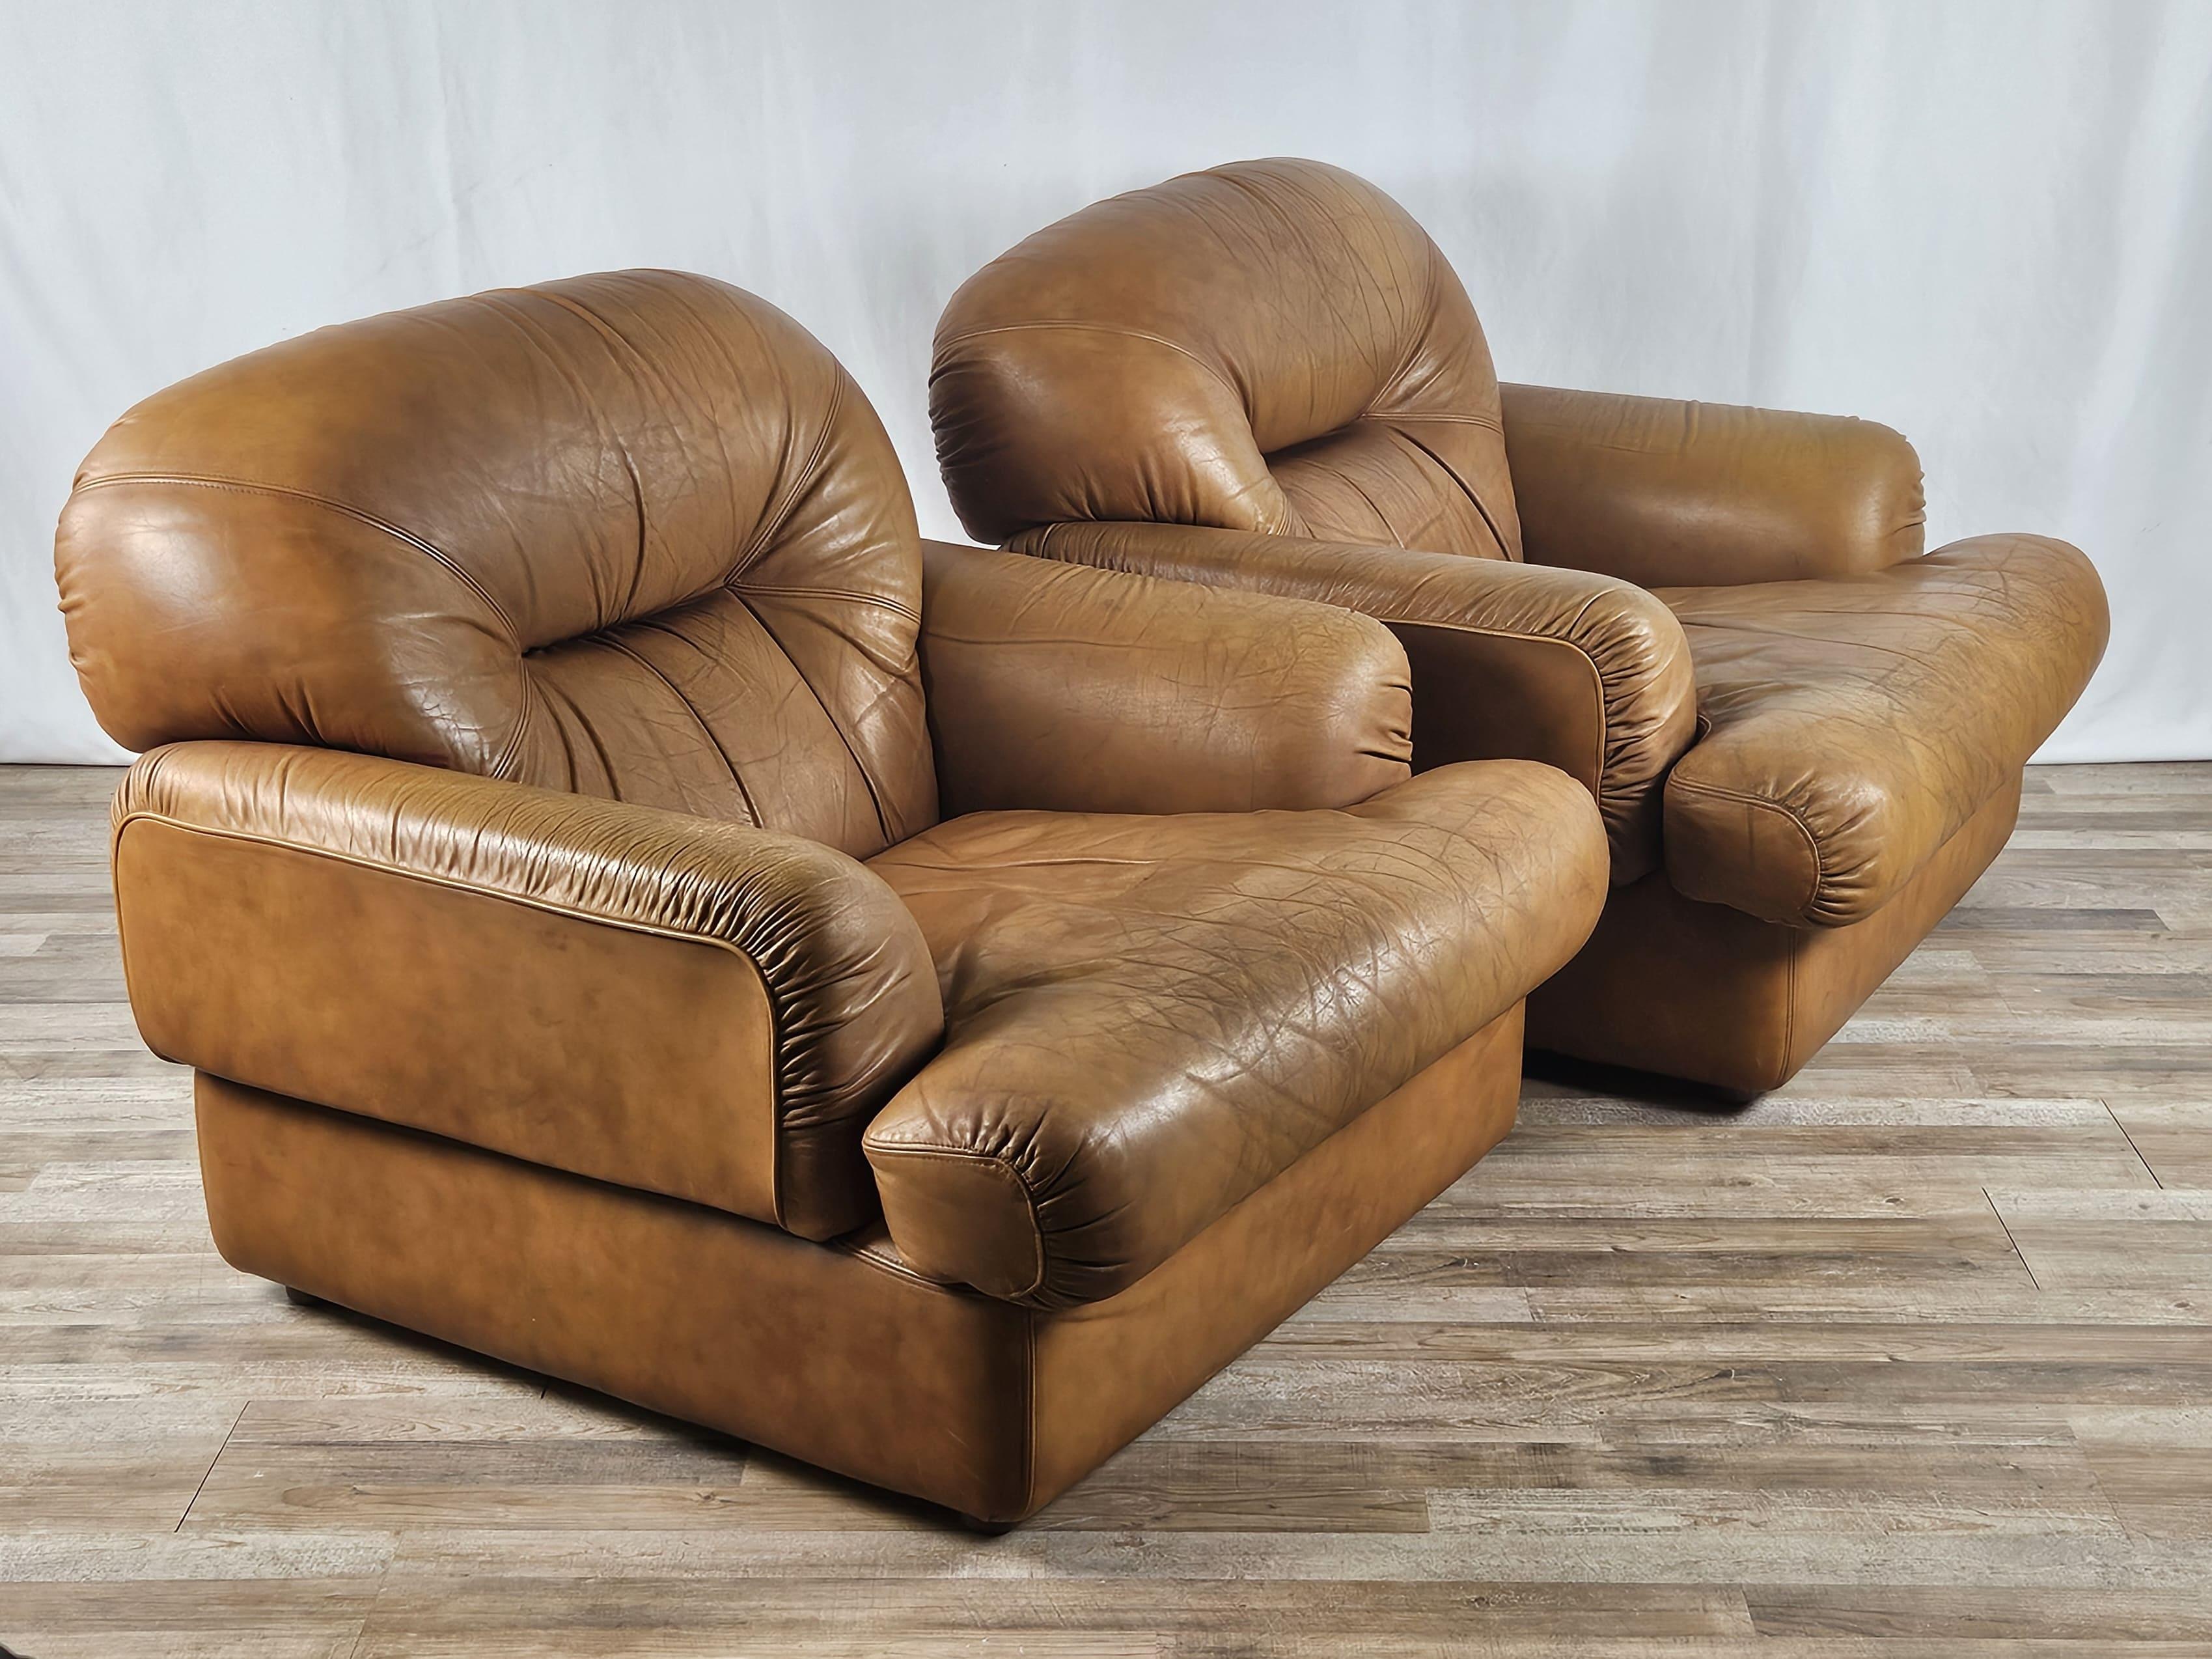 Pair of 1970s leather armchairs, Italian production of high quality and workmanship signed Estasis Milano of Meda (MI).

The armchairs come fully upholstered in a classic cognac color that never goes out of fashion, but rather lends style and